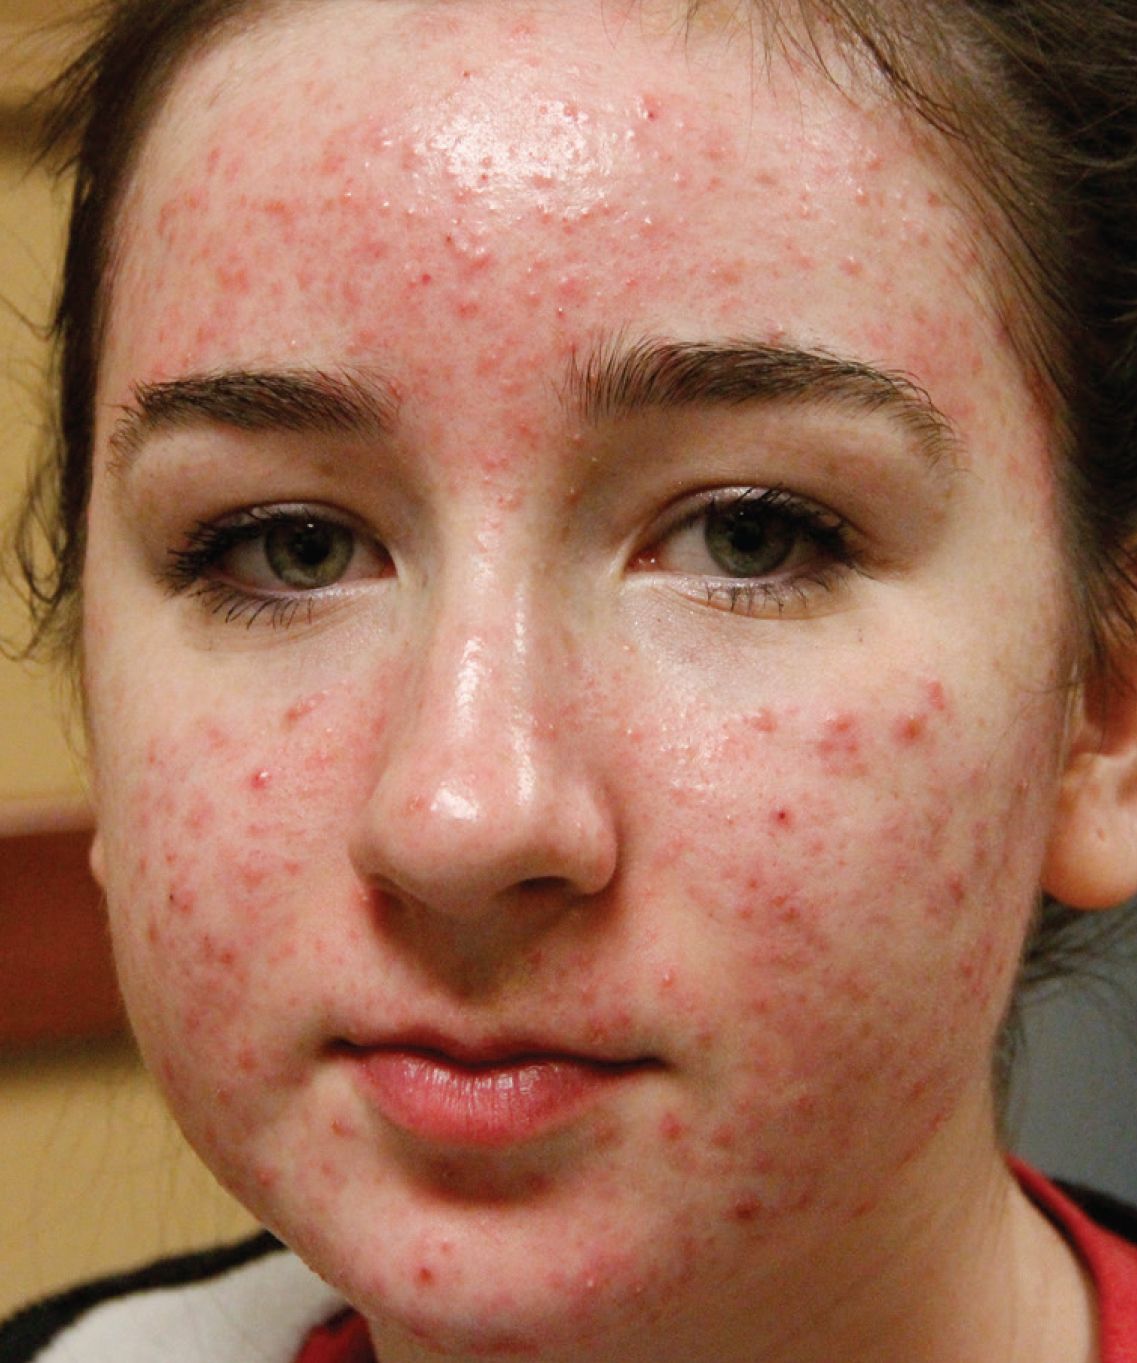 Options to Treat Acne Without Antibiotics - Dy Dermatology